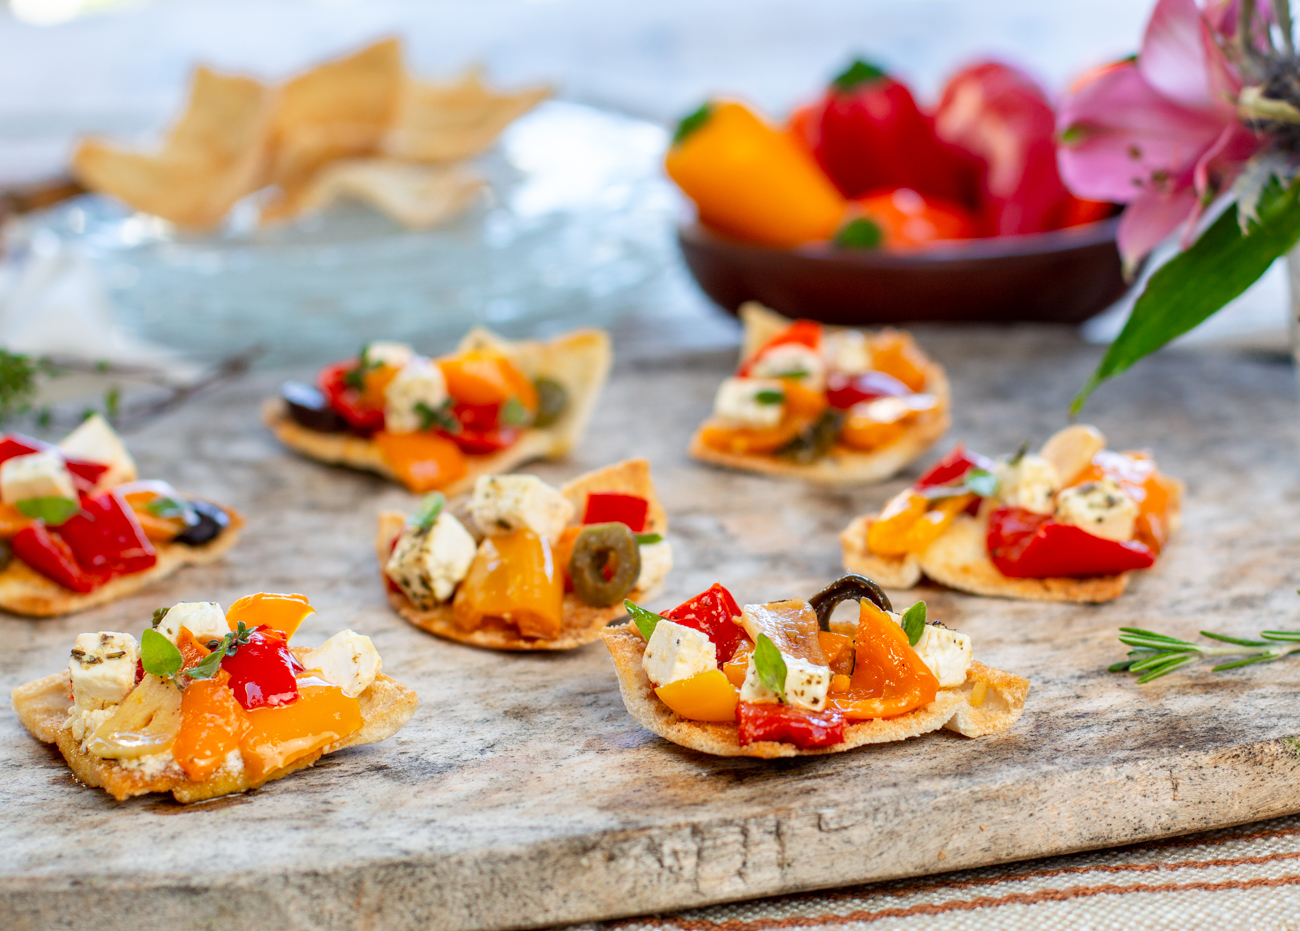 Serving the Mediterranean Slow-Baked Appetizer with Feta, Colorful Peppers, Olives & Garlic on toasted pita triangles